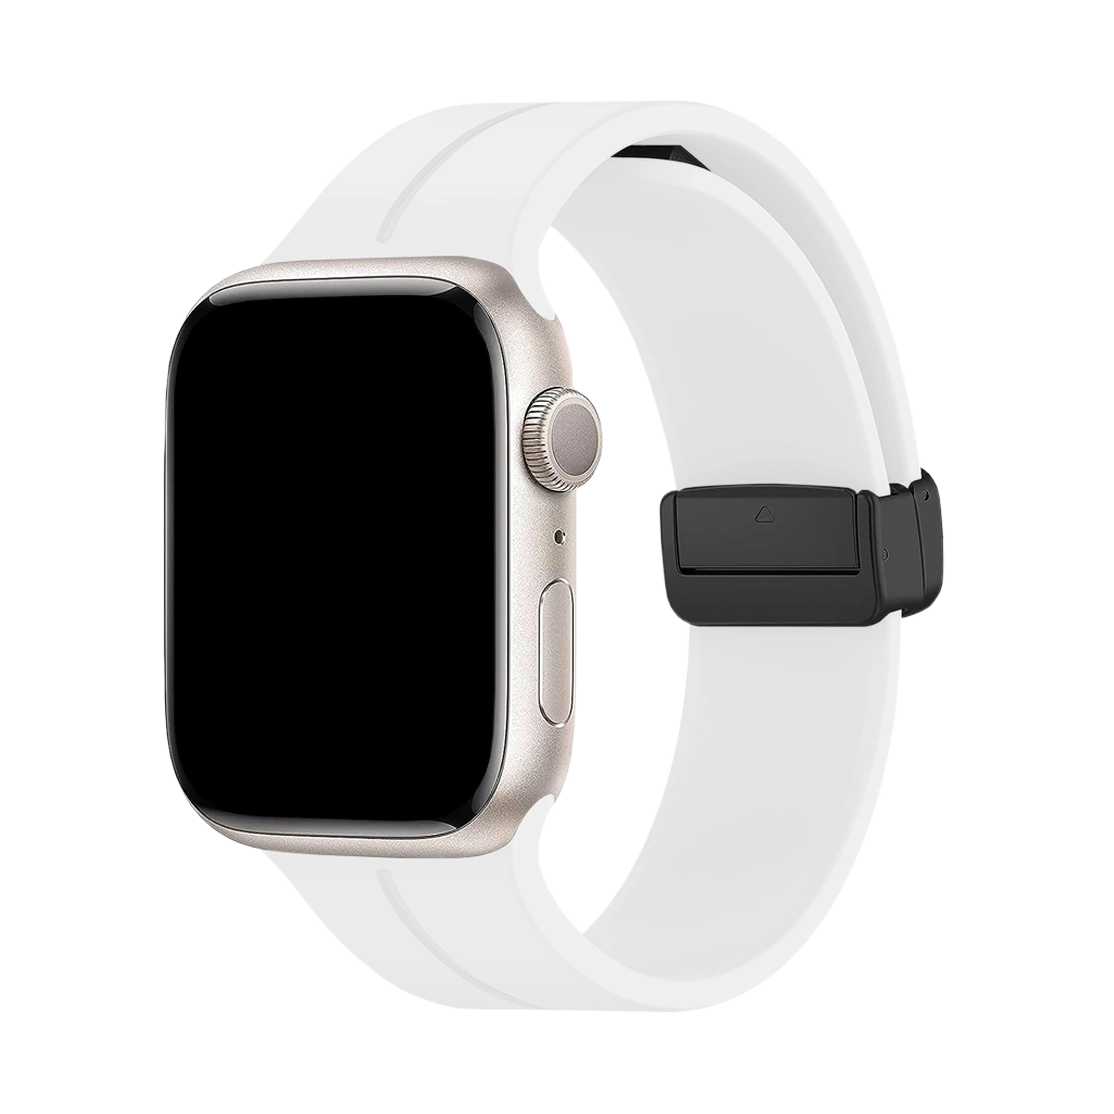 Unipha Apple Watch Silicone Band Magnetic D-Buckle Strap Stylish Creative